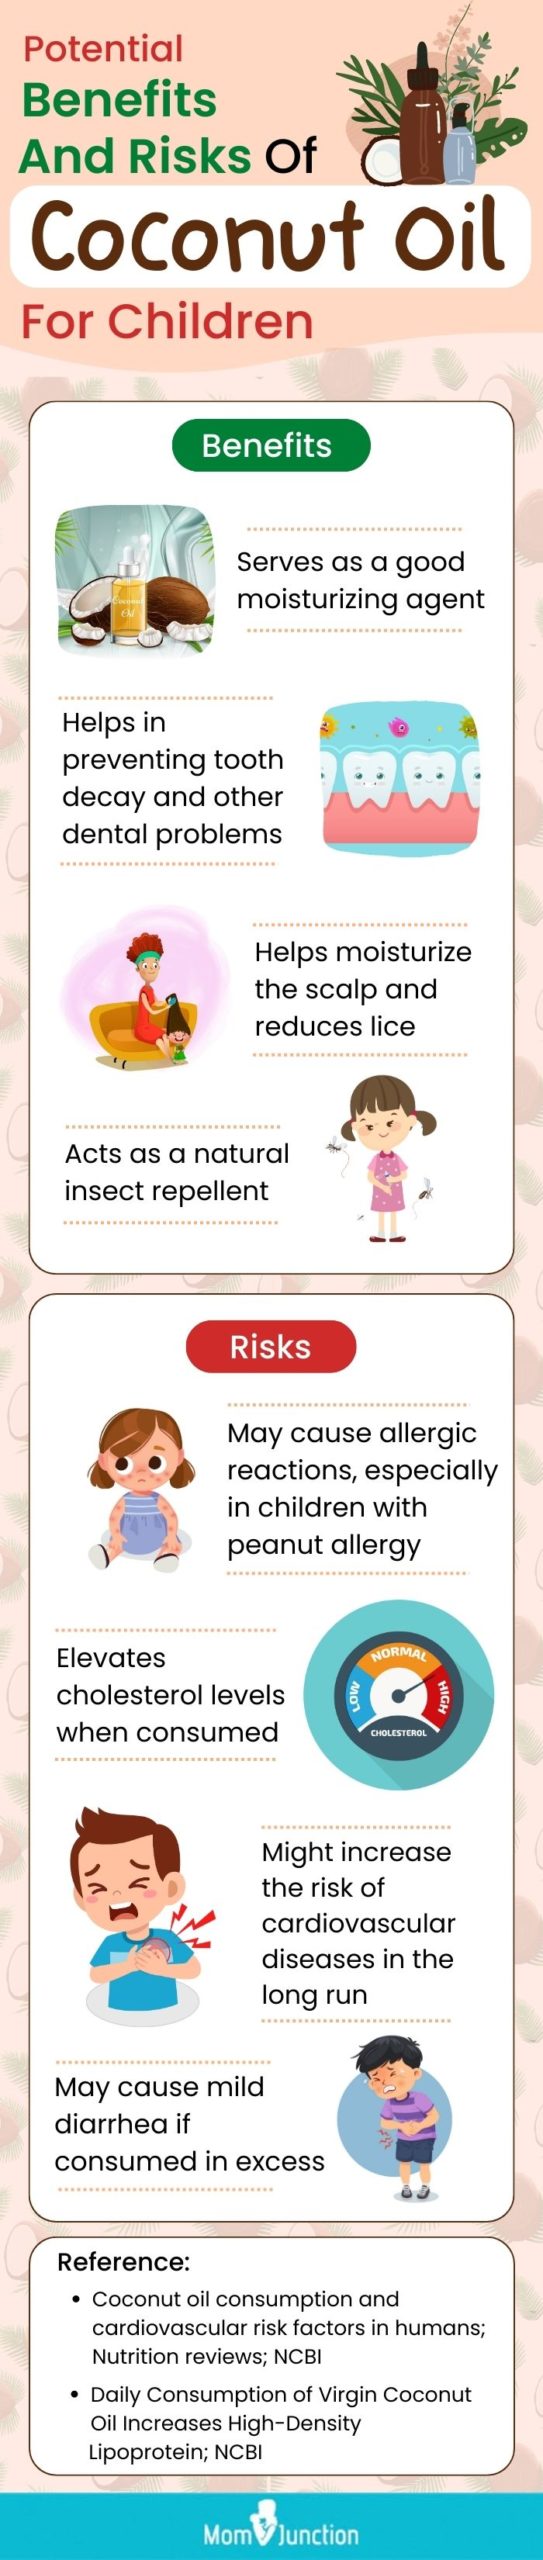 potential benefits and risks of coconut oil for children (infographic)